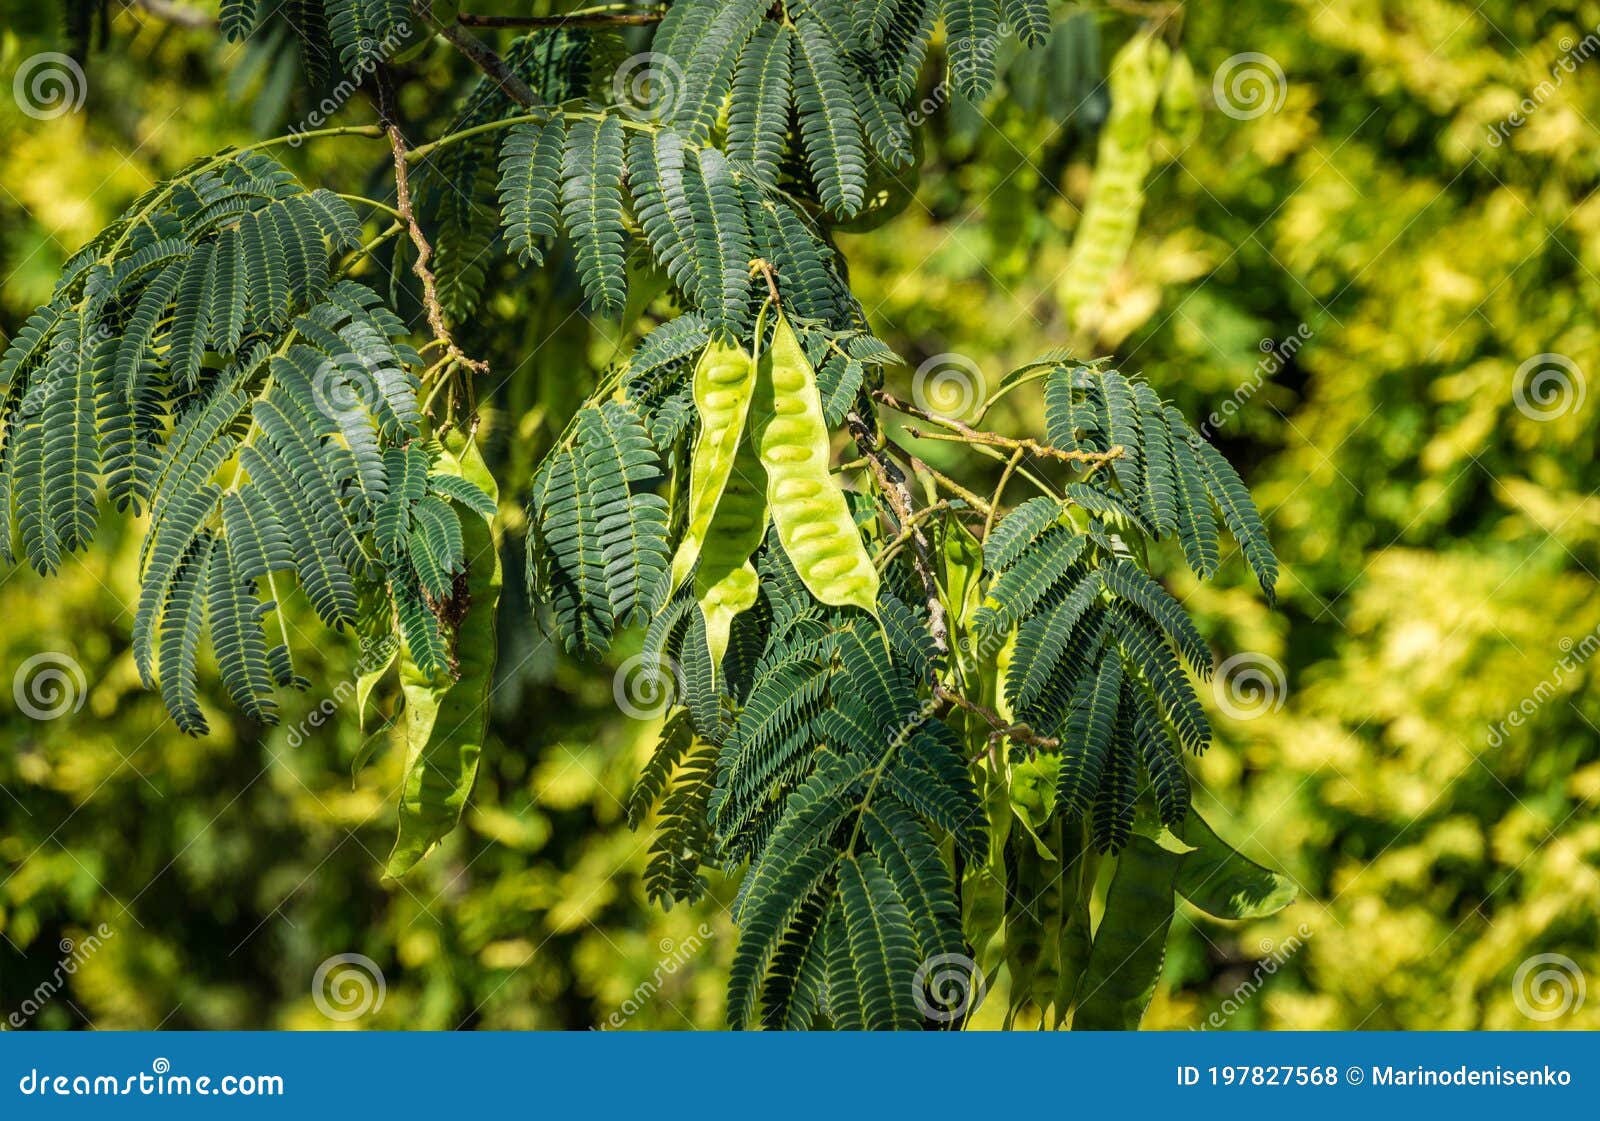 Closeup Of Seed Pods And Green Leaves Of Persian Silk Tree Albizia Julibrissin Japanese Acacia Or Pink Silk Tree Stock Photo Image Of Closeup Landscape